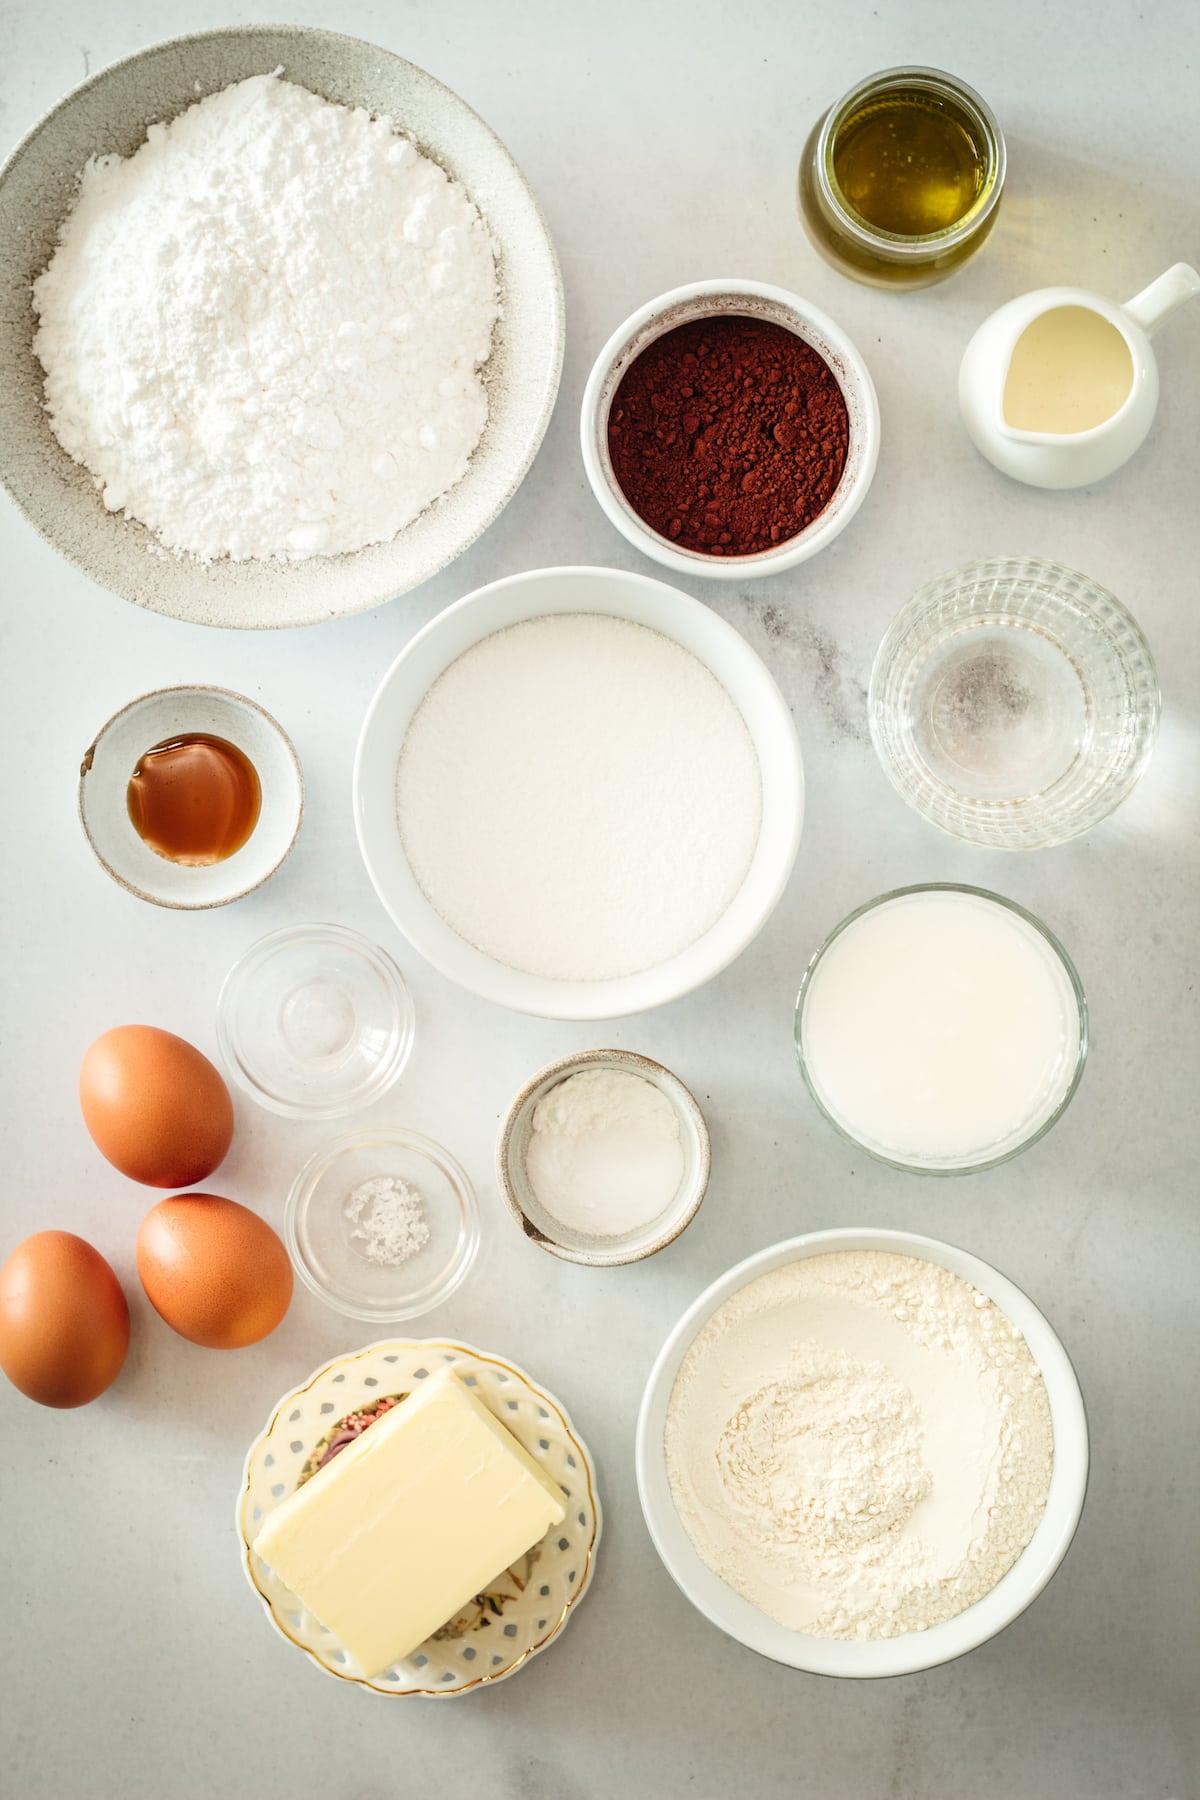 Overhead view of chocolate peppermint cake ingredients